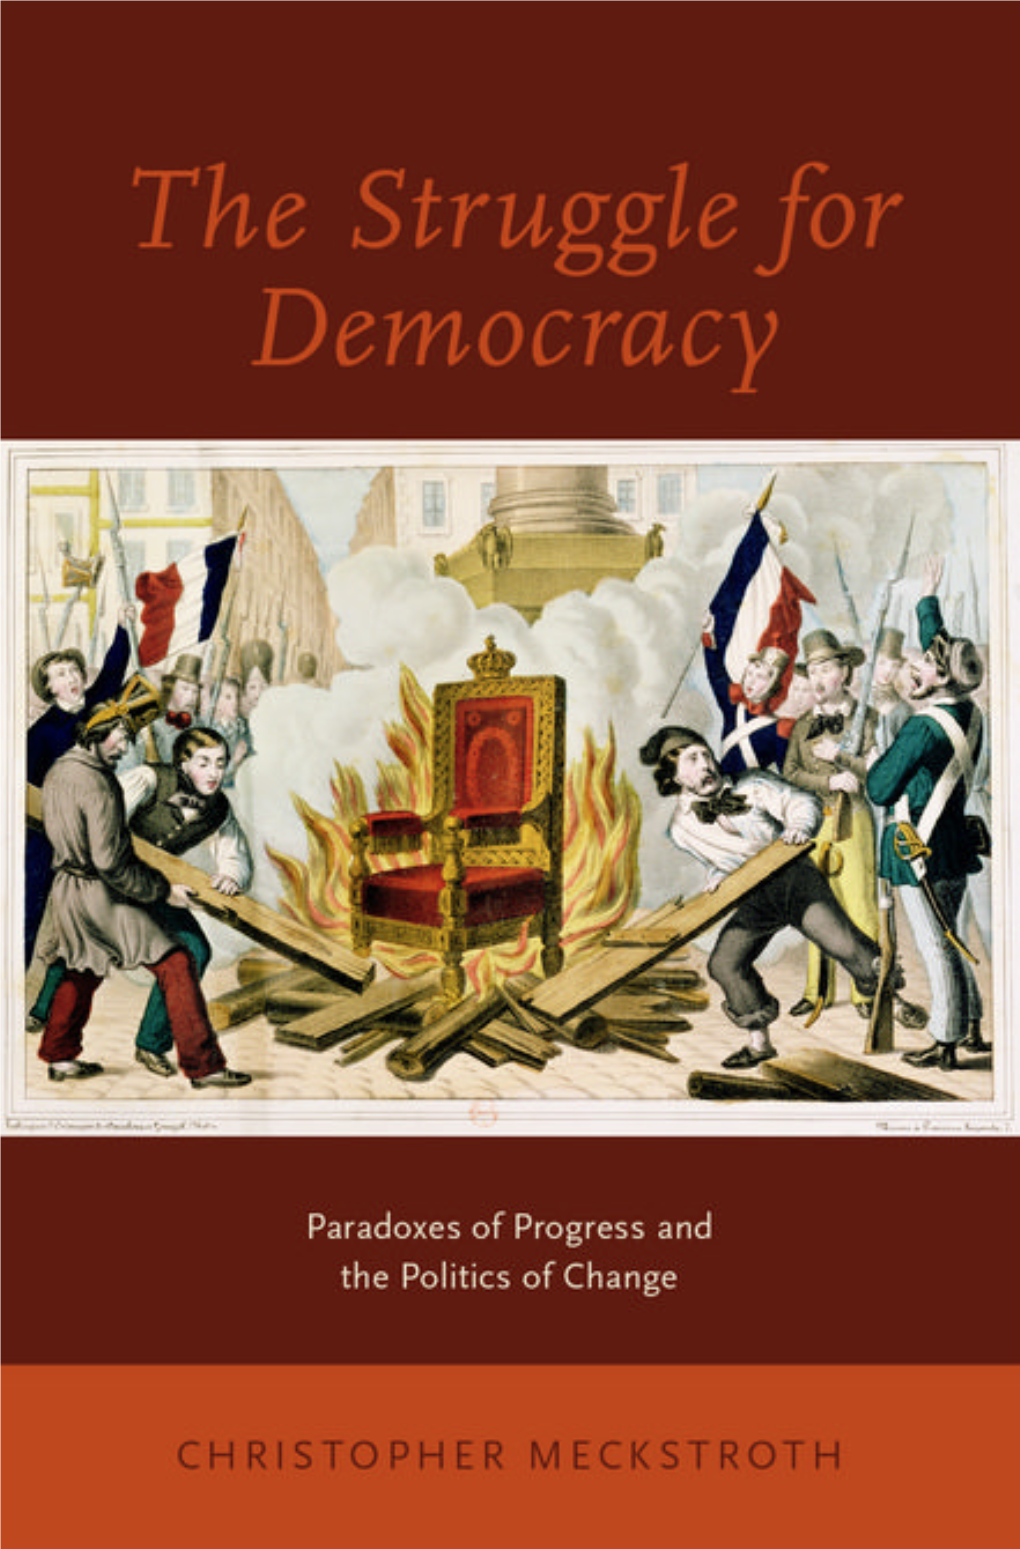 The Struggle for Democracy by Christopher Meckstroth.Pdf